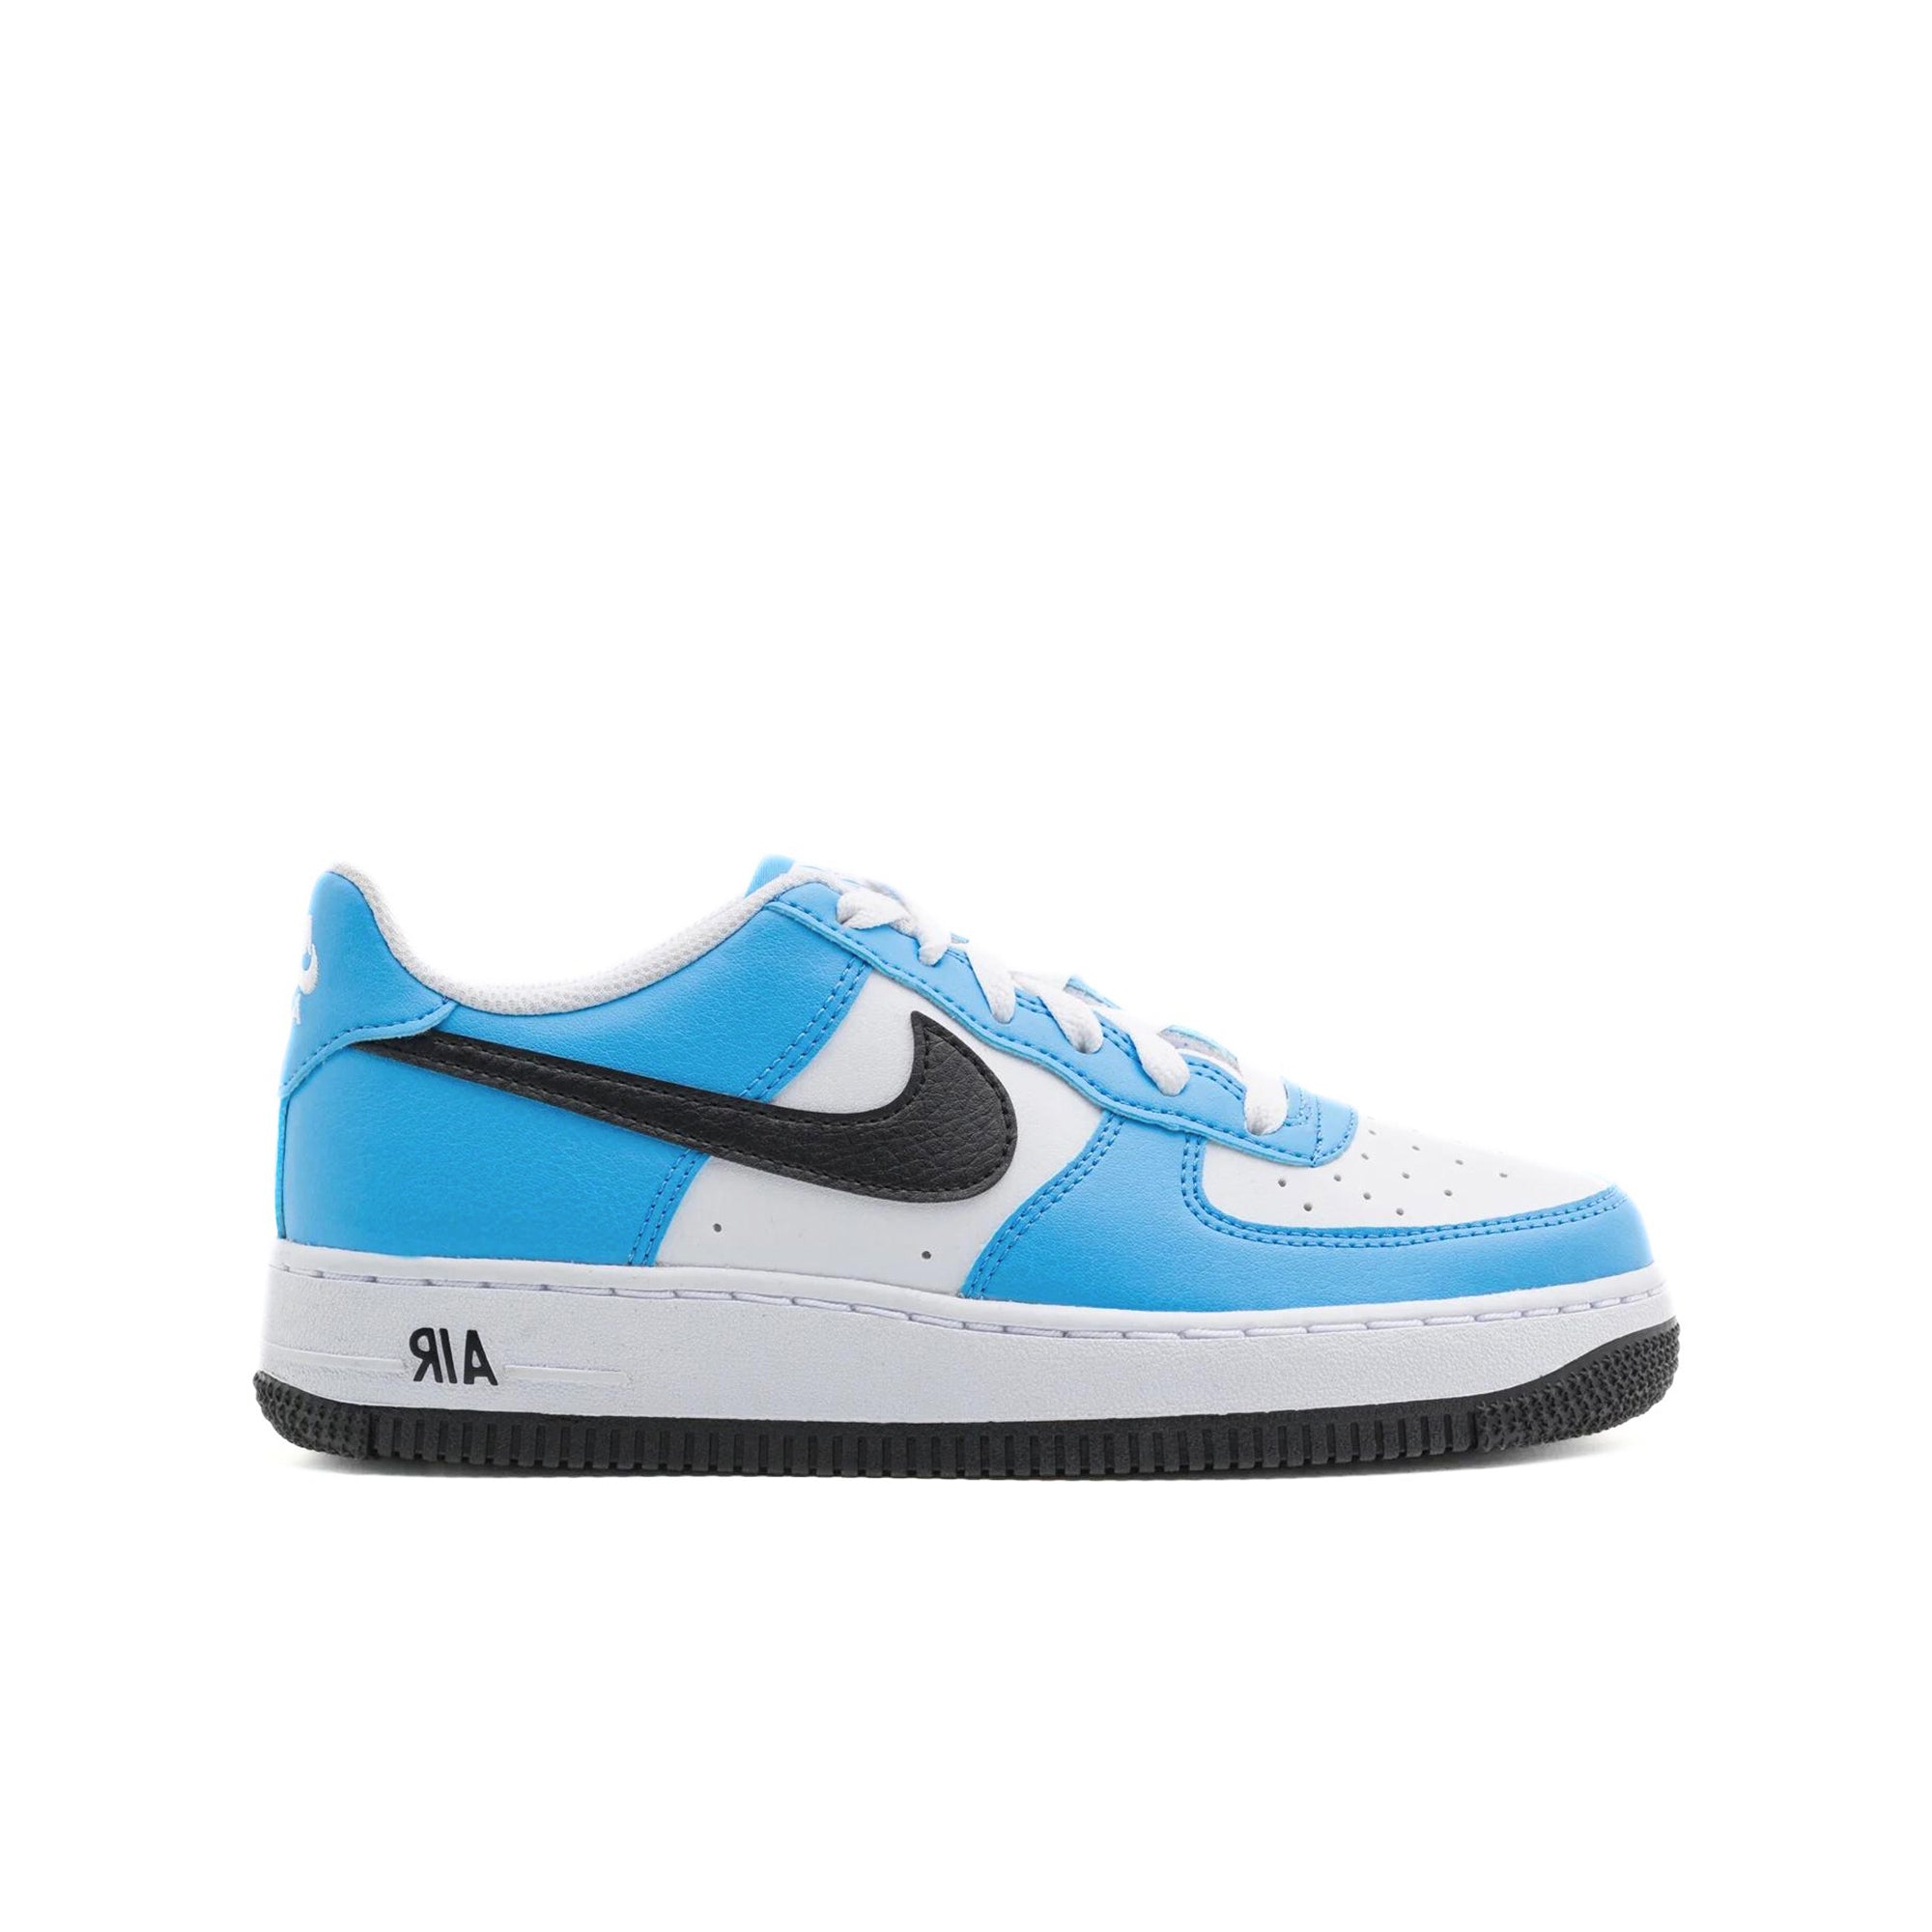 nike air force 1 black and blue Nike Air Force 1 Low GS Dark Powder Blue Black | FN3810-400 35.5 - Livrare 7-14 zile